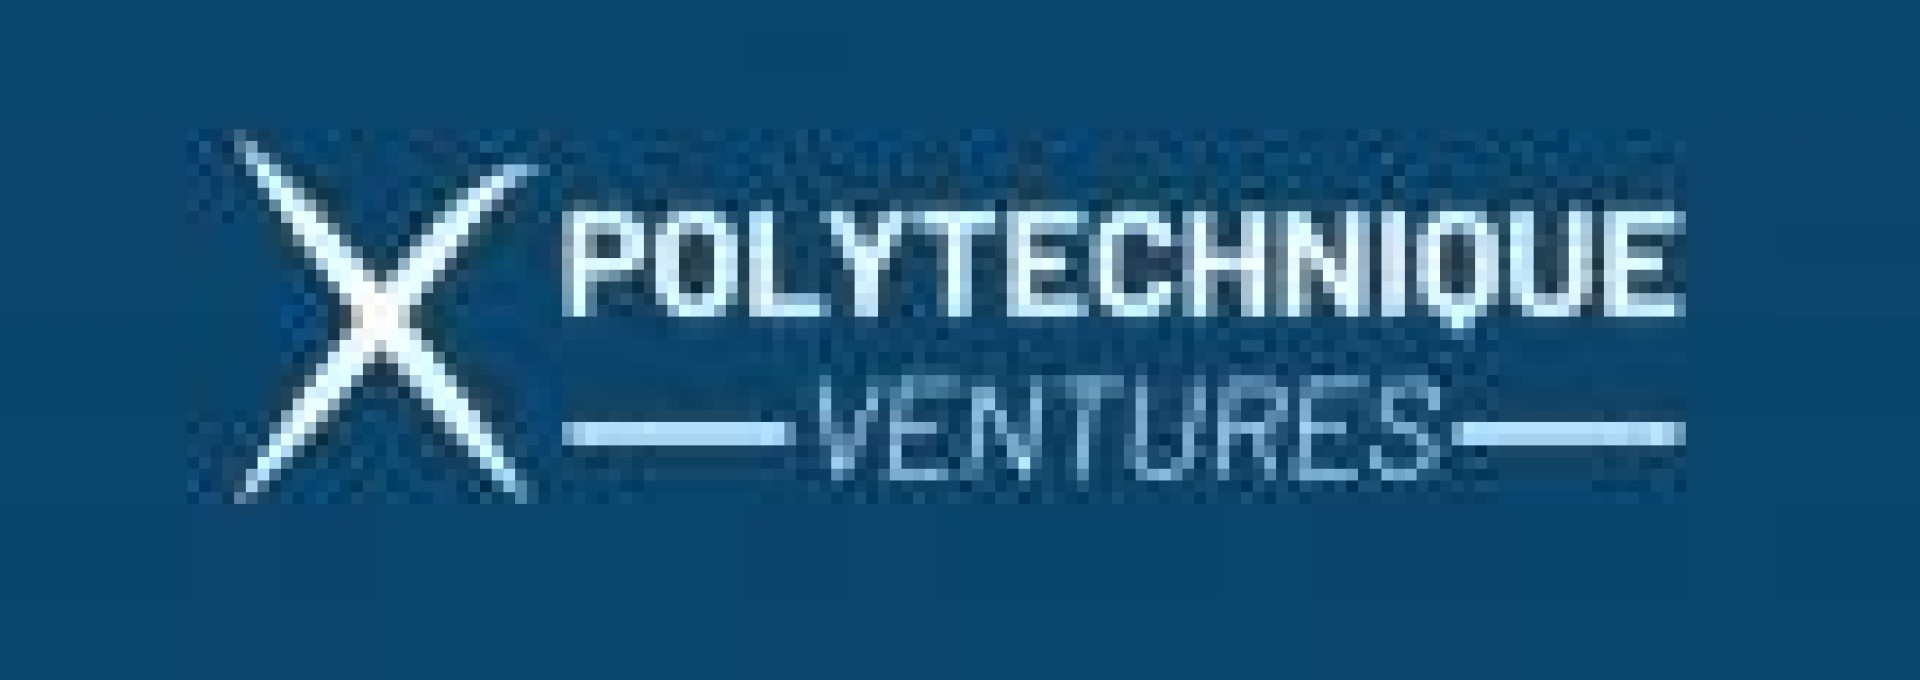 Polytechnique Ventures has already closed a third investment